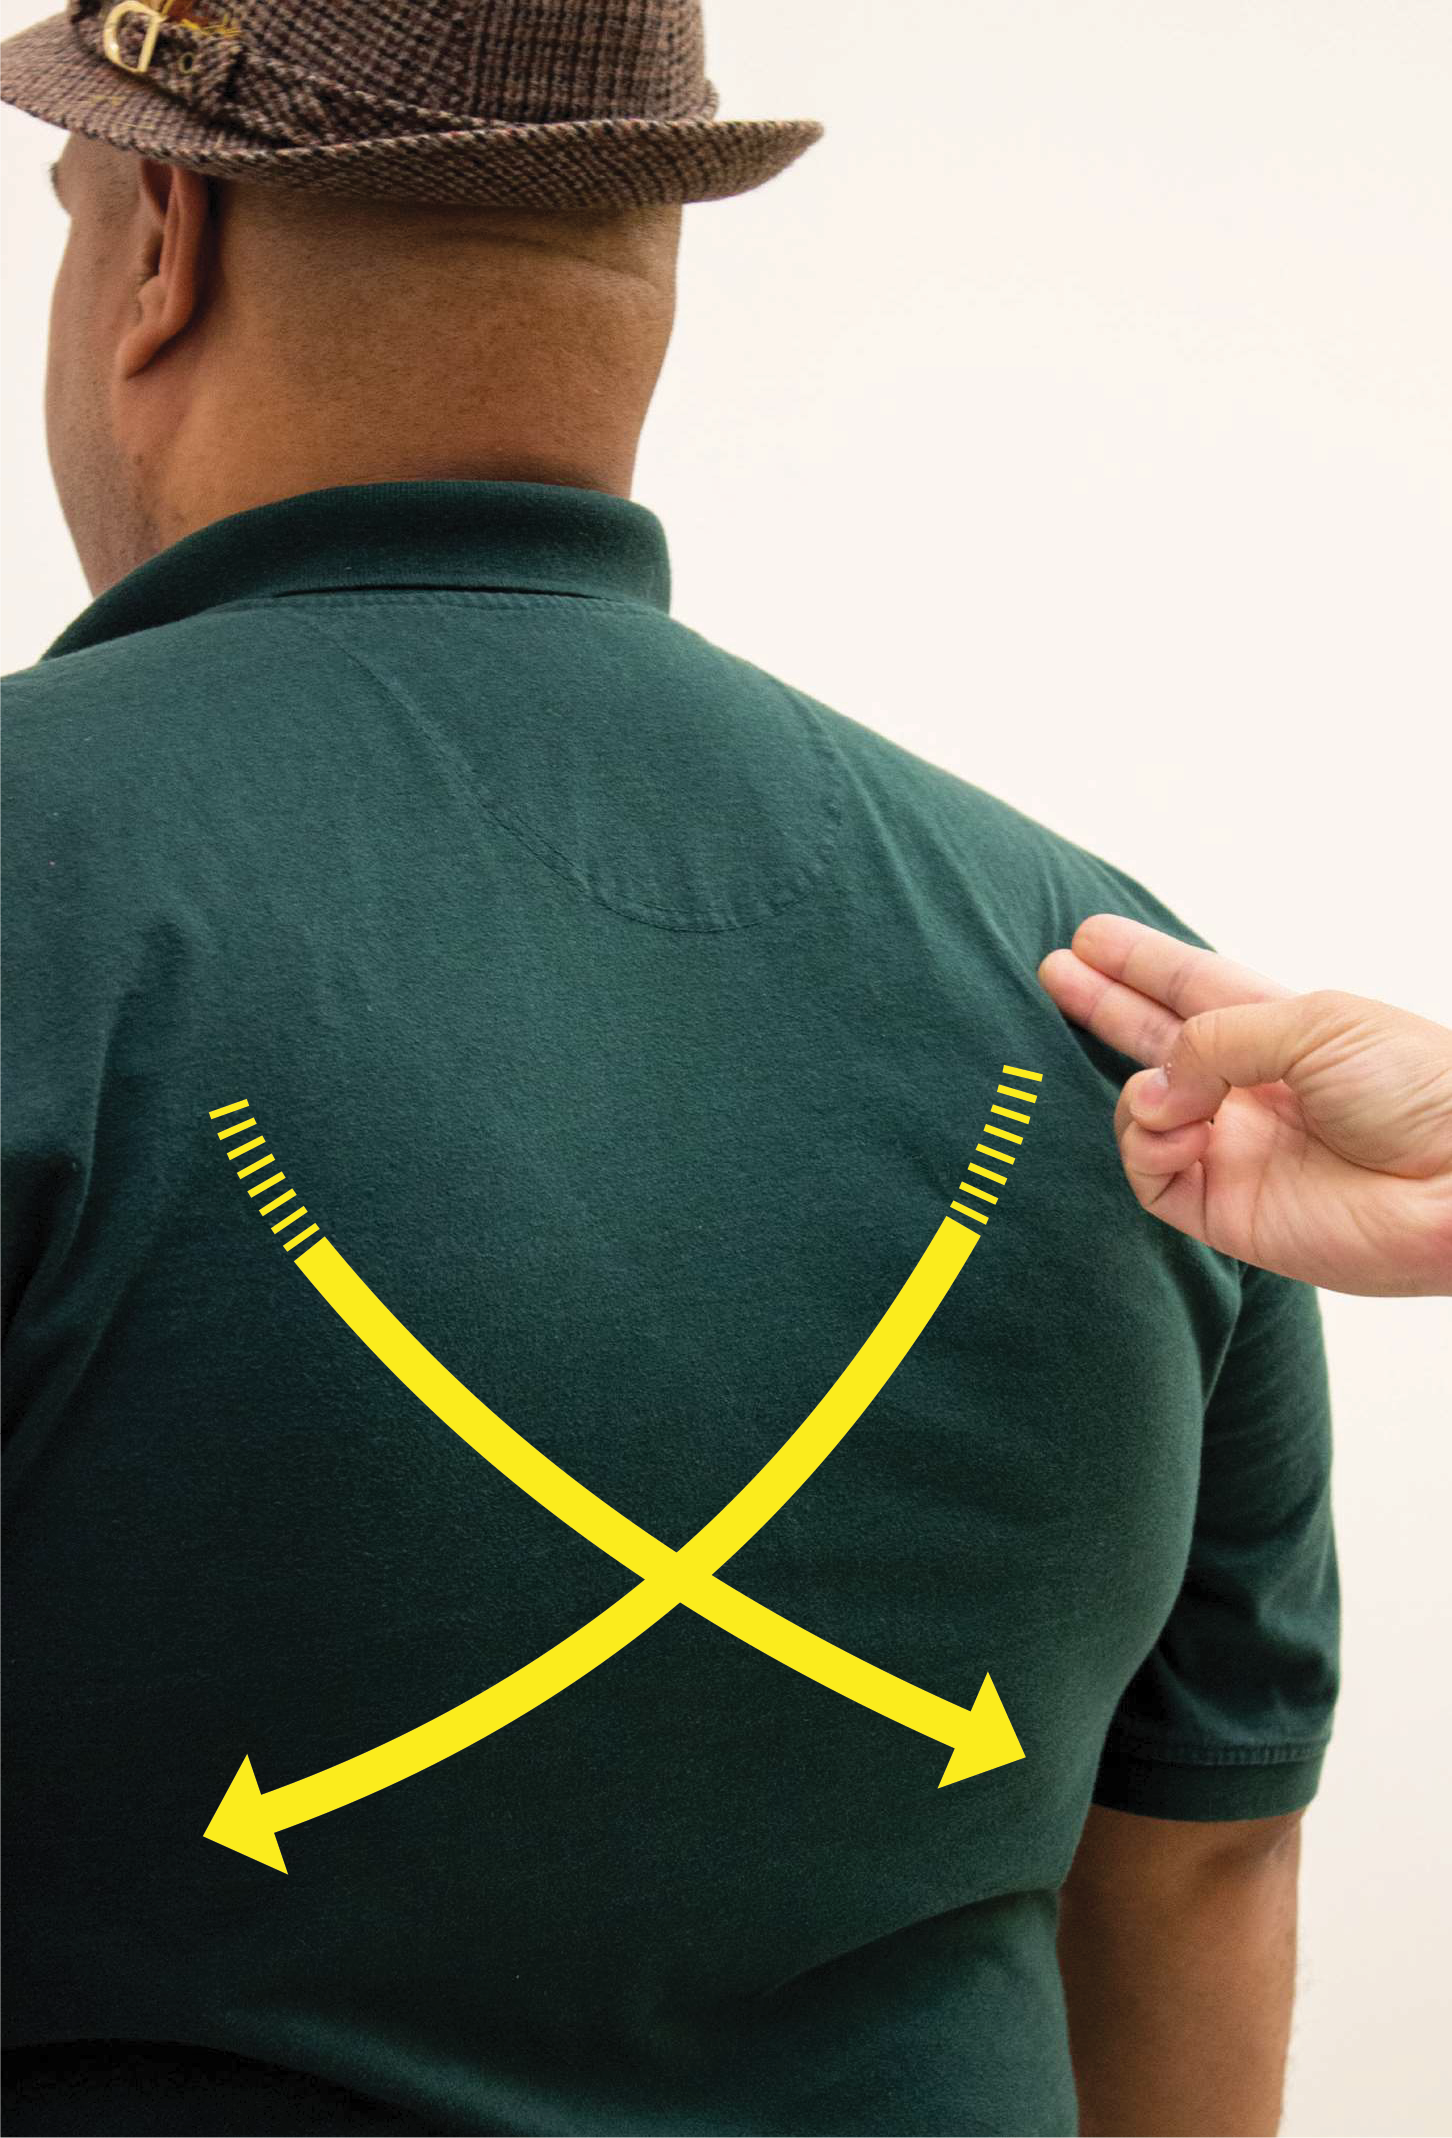 A person demonstrates drawing an “X” on someone’s back – the universal sign for an emergency.